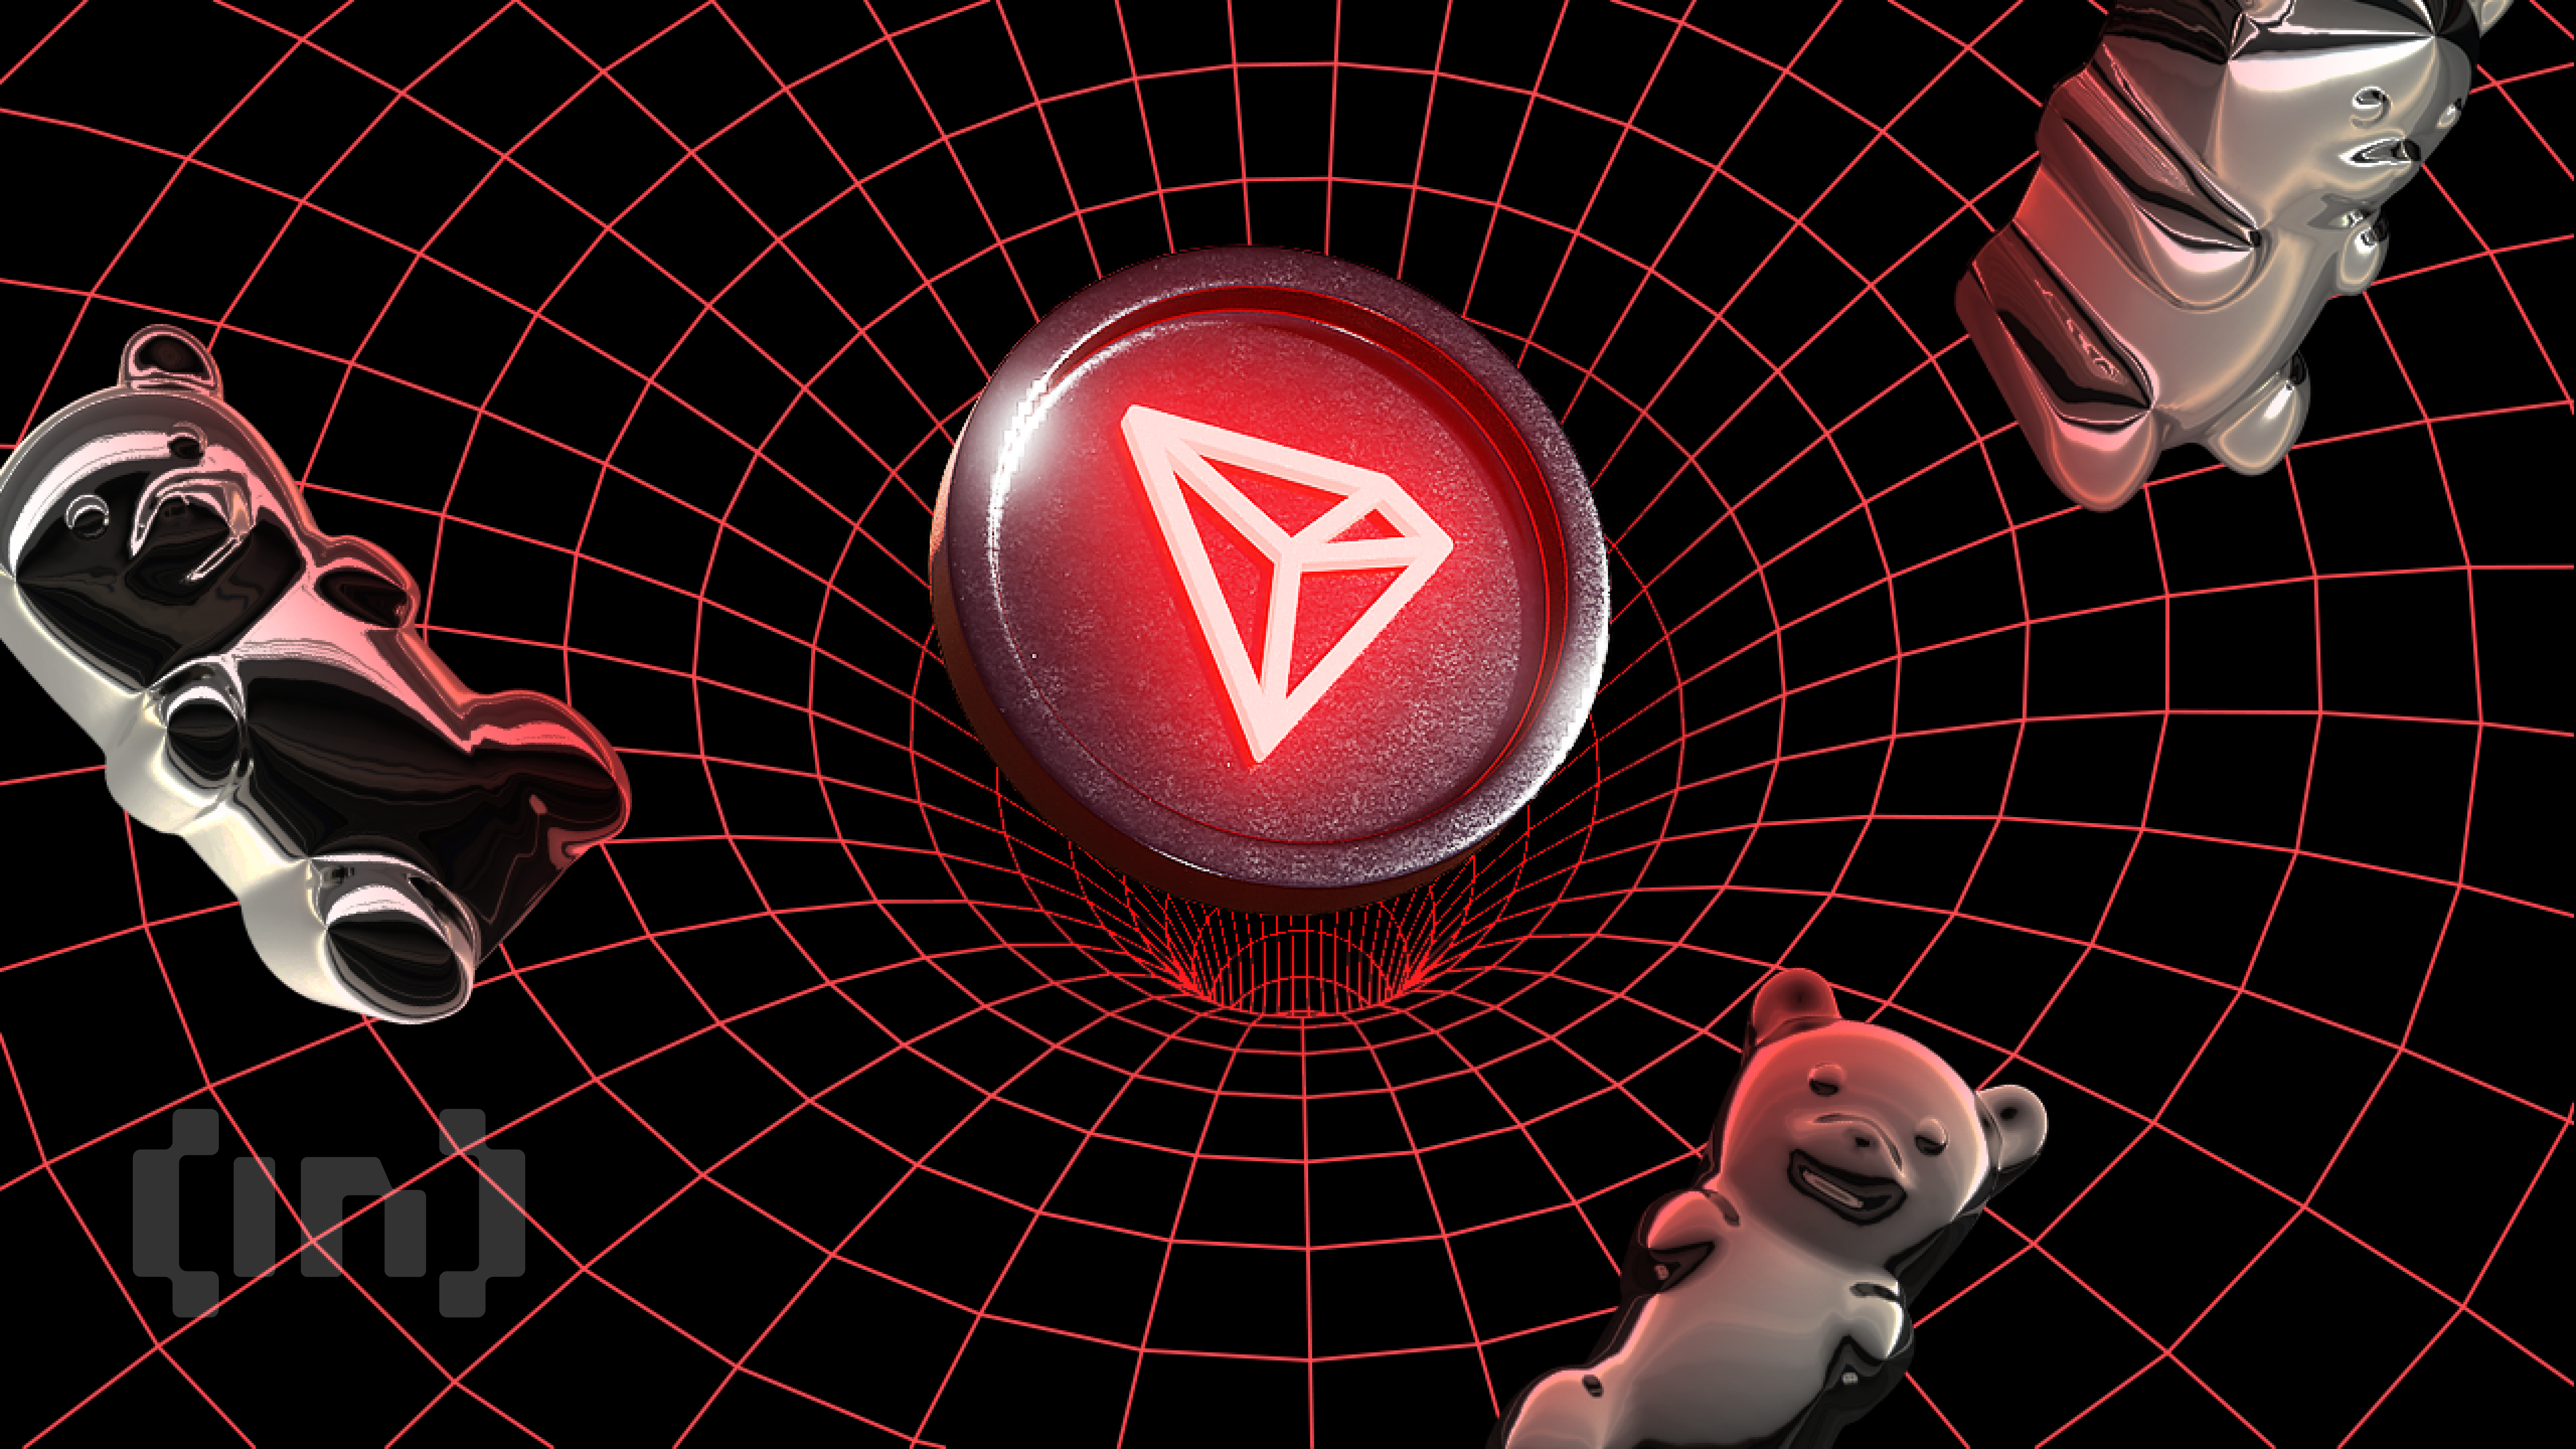 TRON (TRX) Price Is Staring Into the Abyss – Is a 35% Drop Incoming?